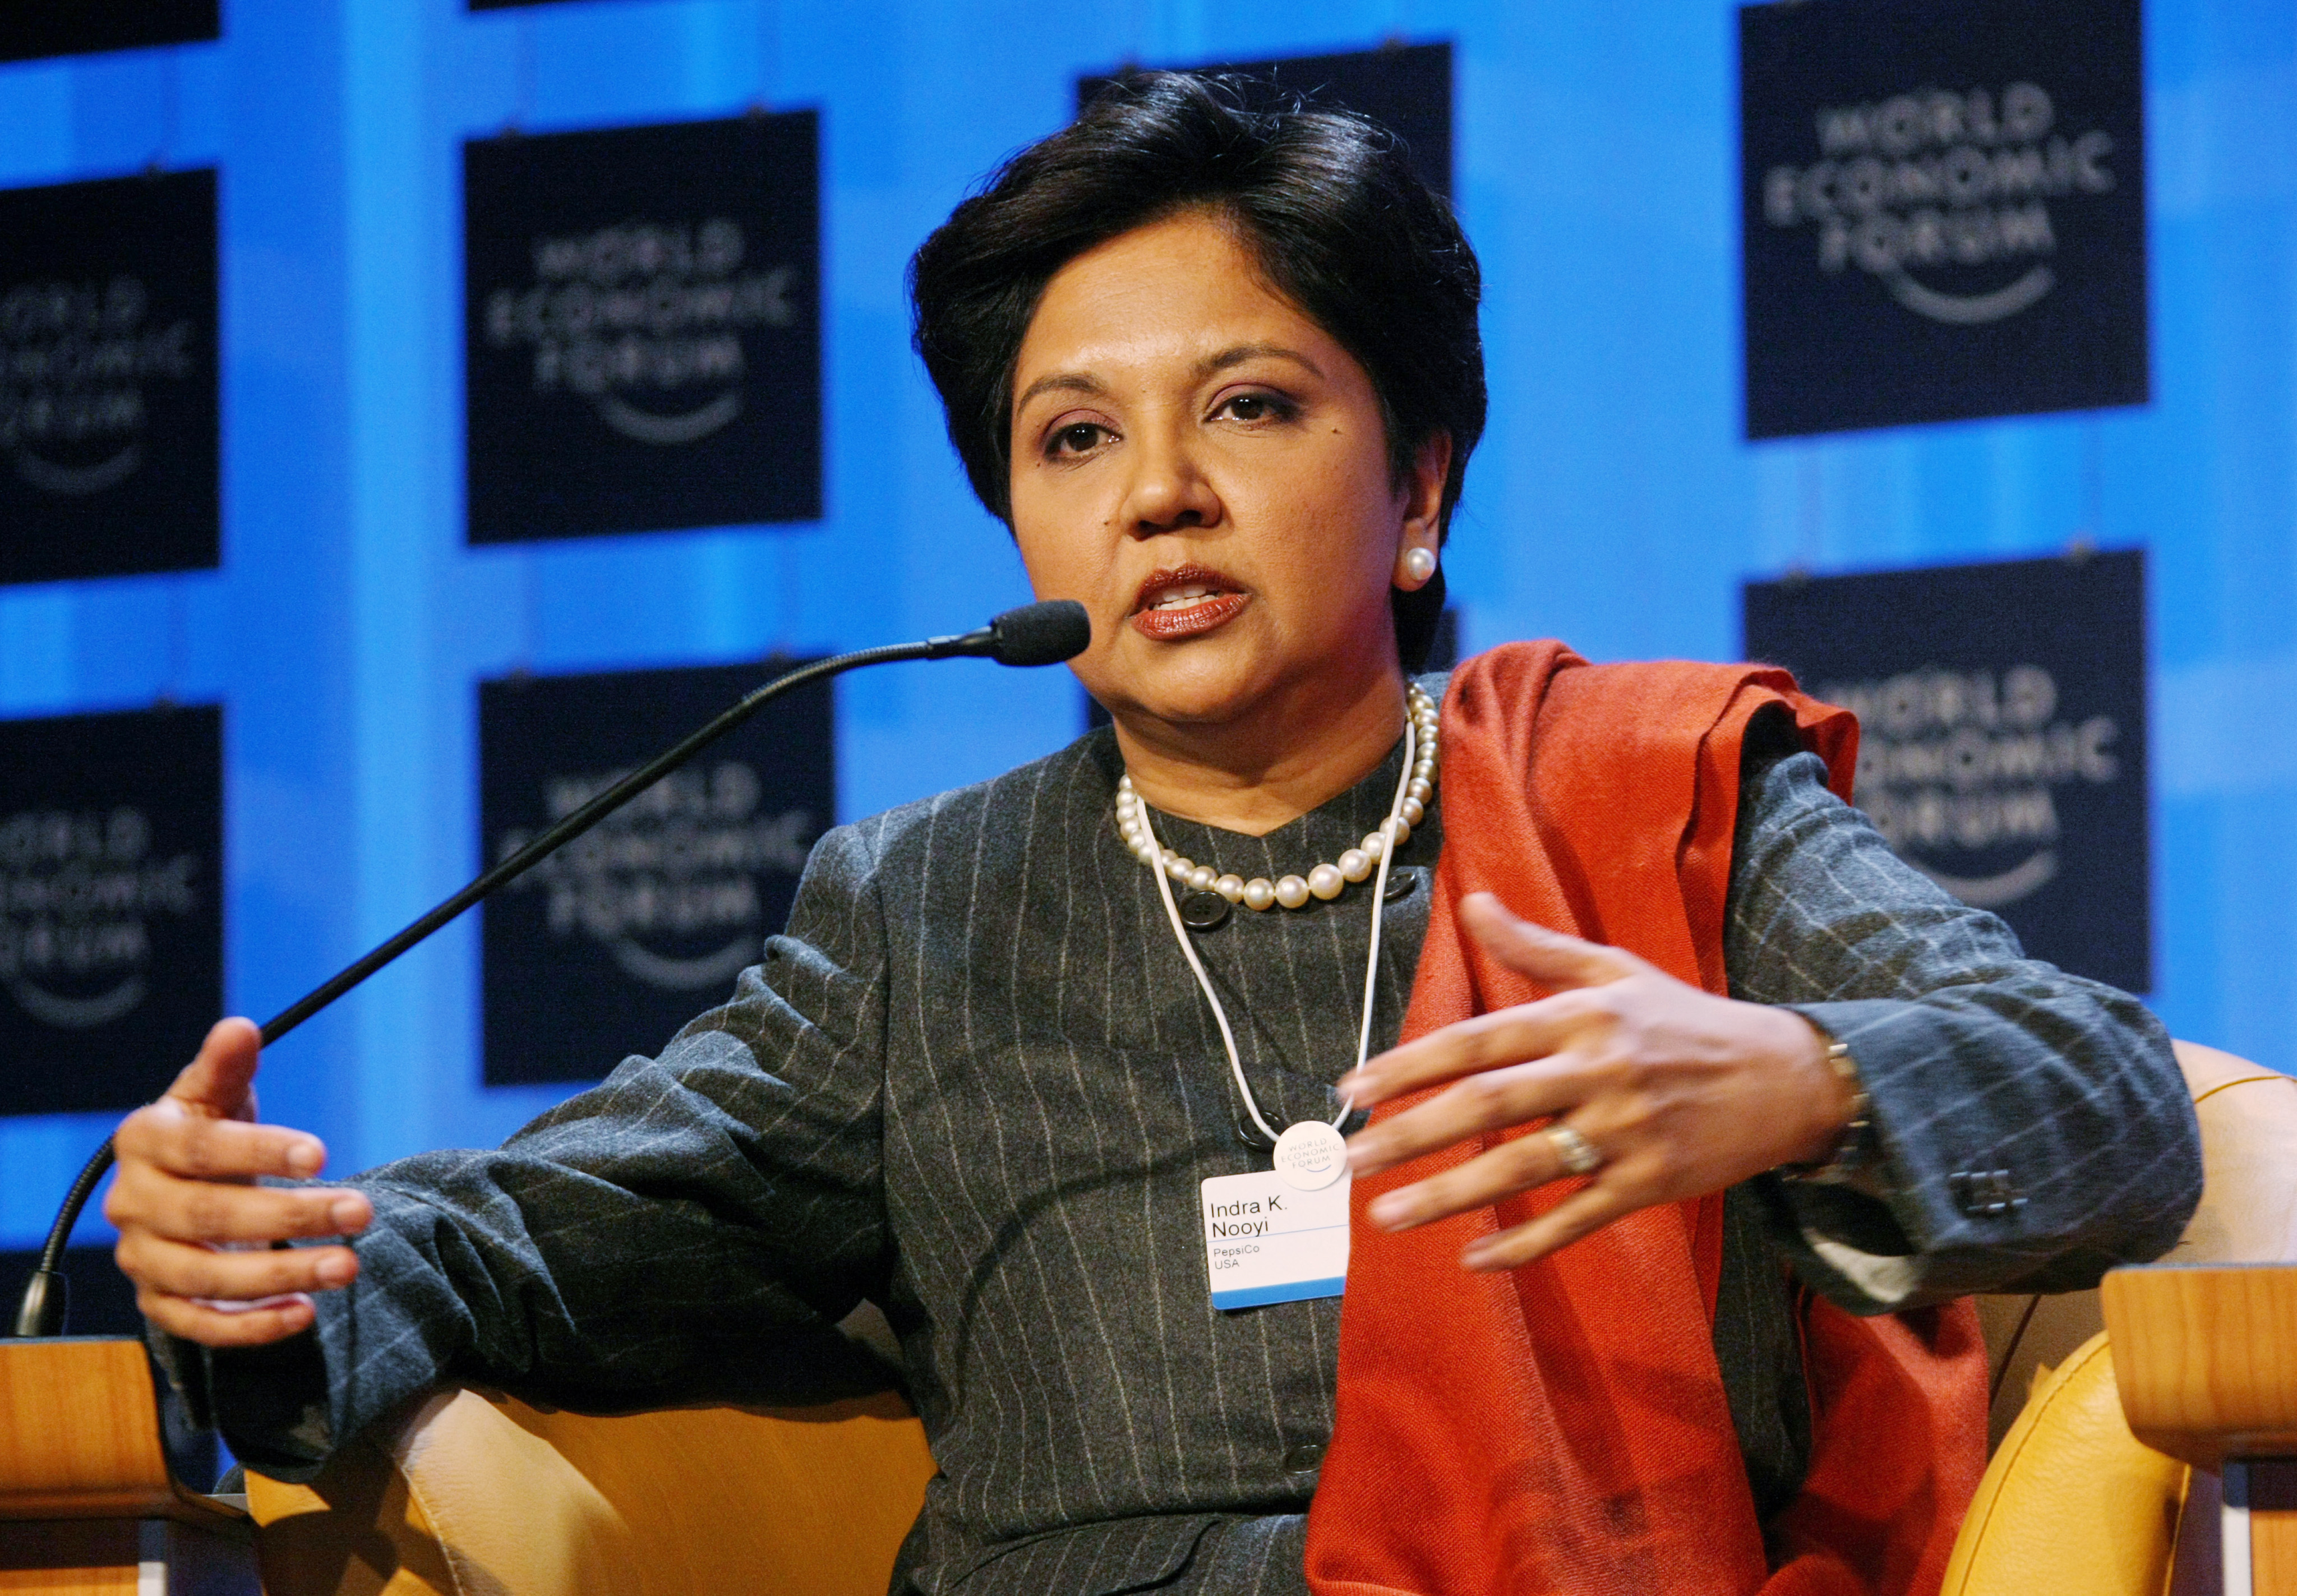 Impression of the Annual Meeting 2008: Indra K. Nooyi